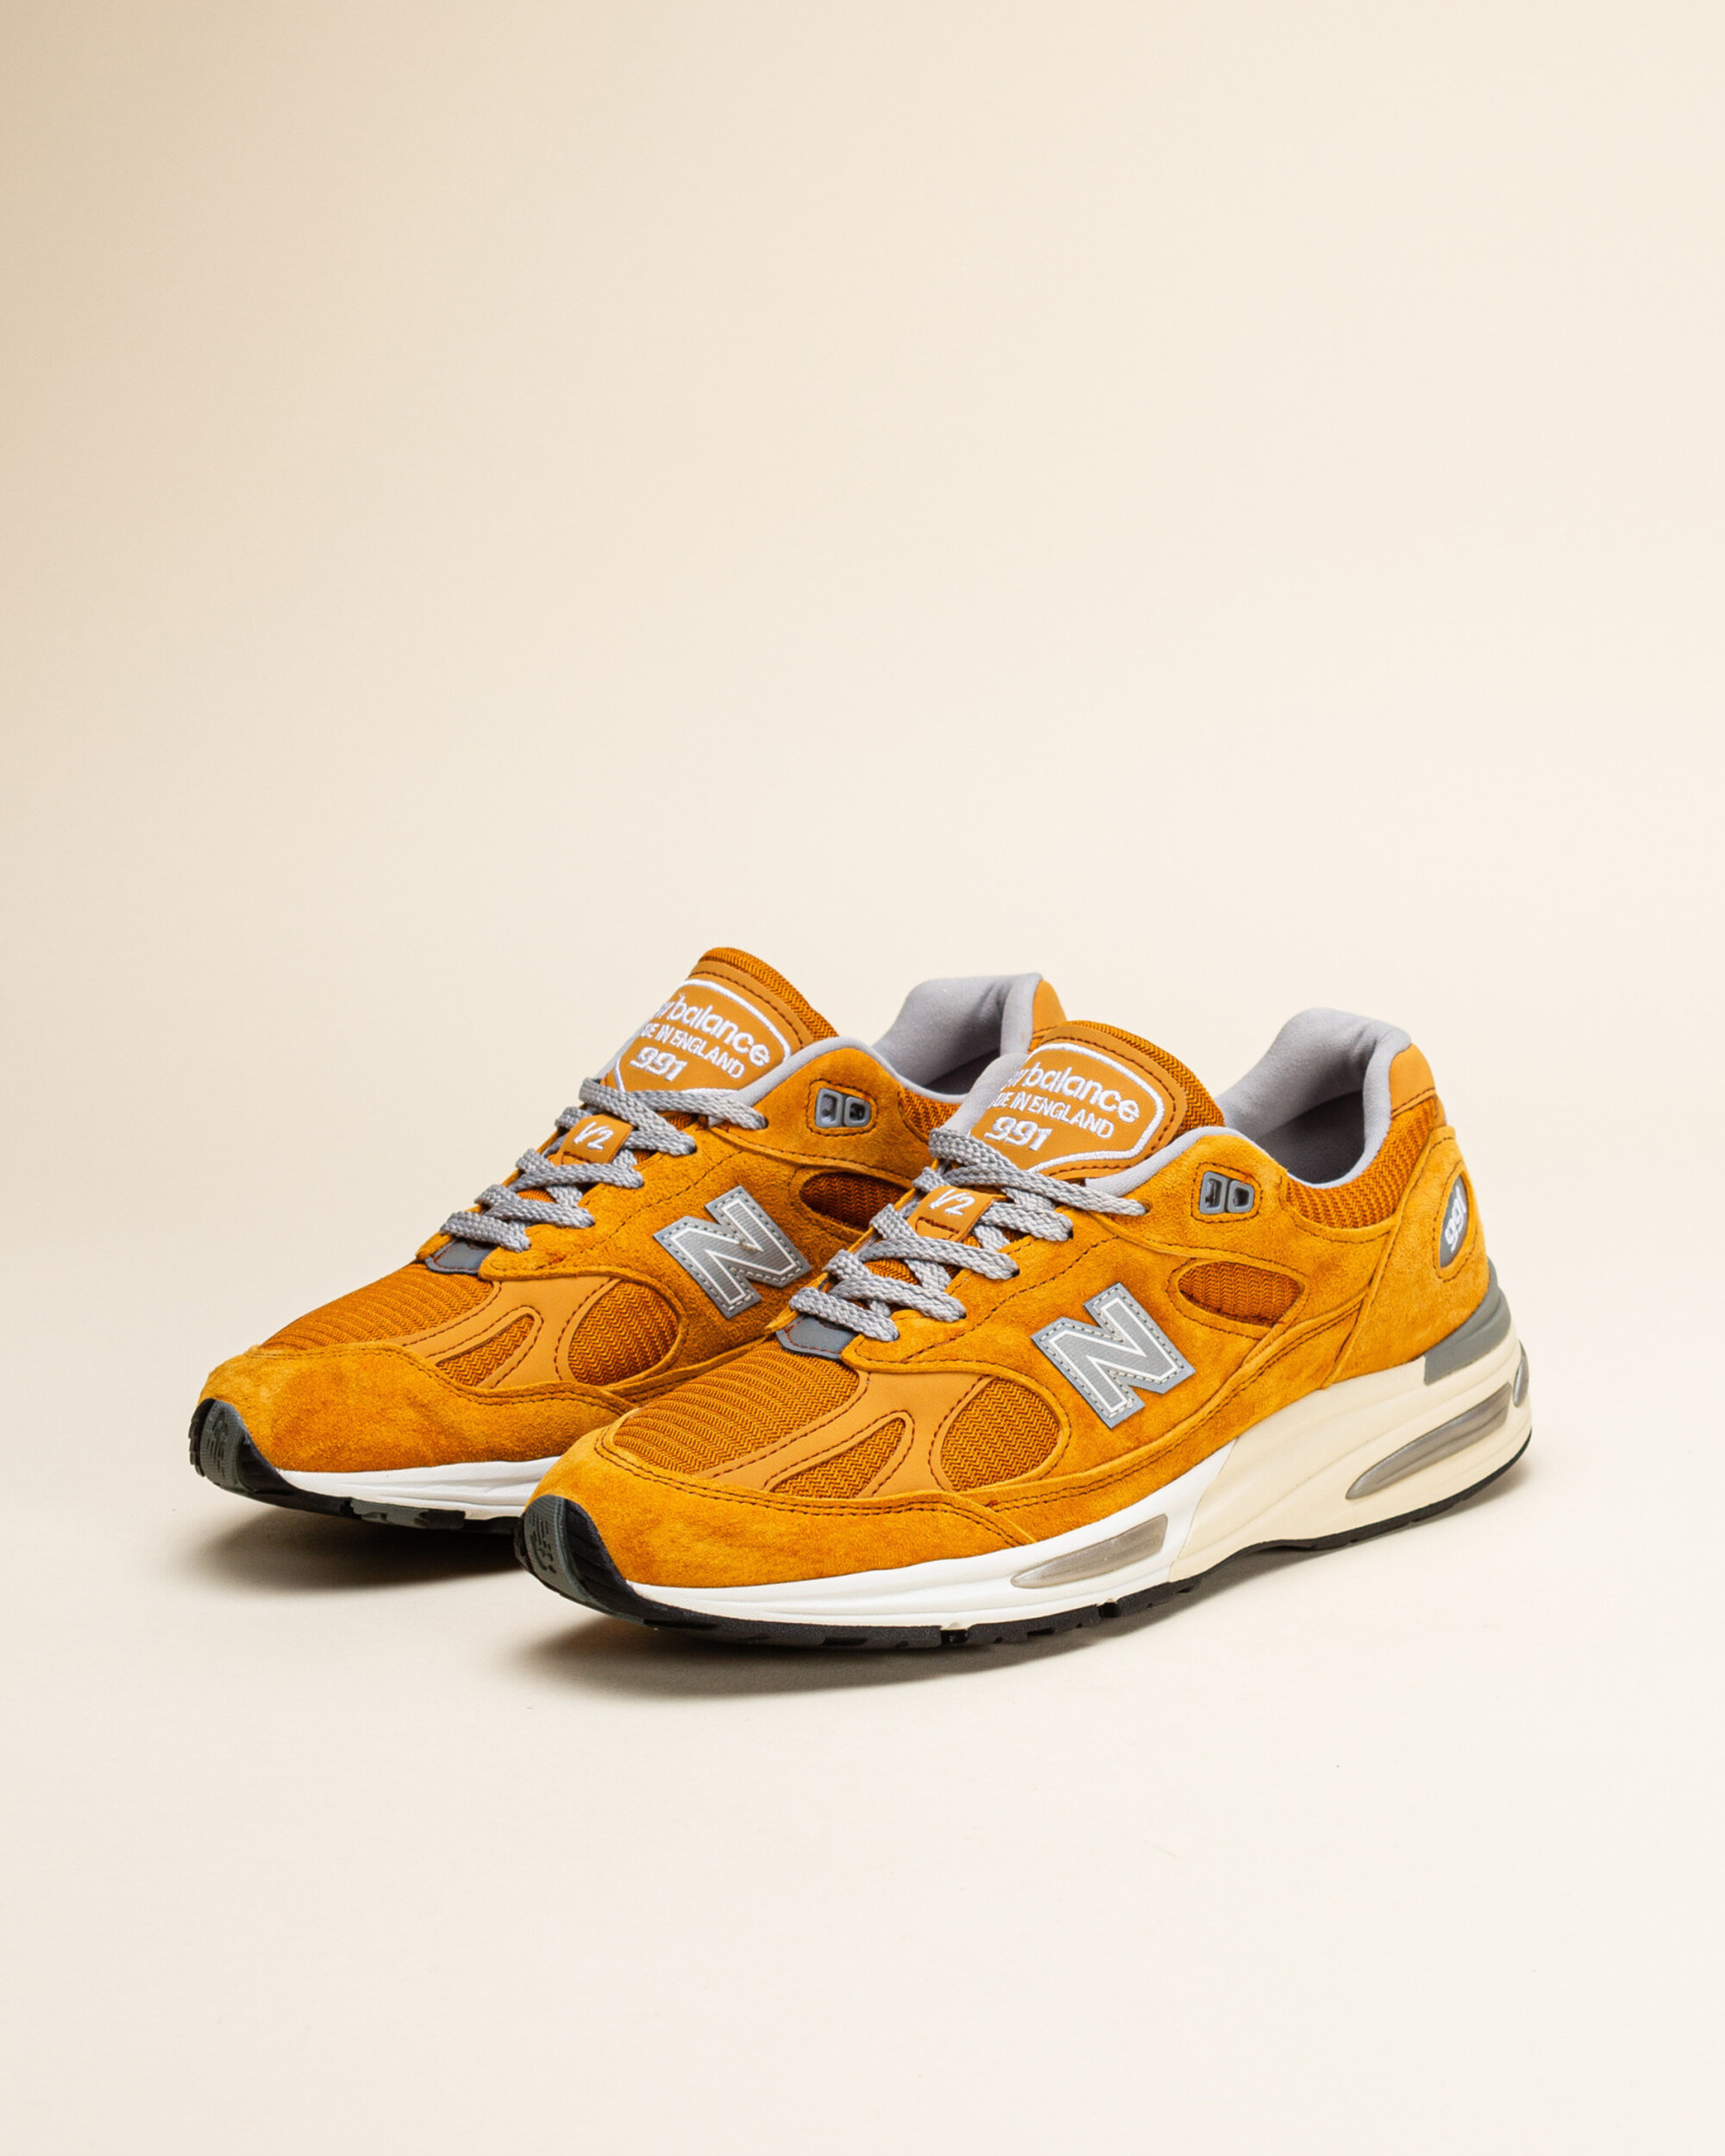 New Balance Made In UK 991v2 - Yellow/Silver